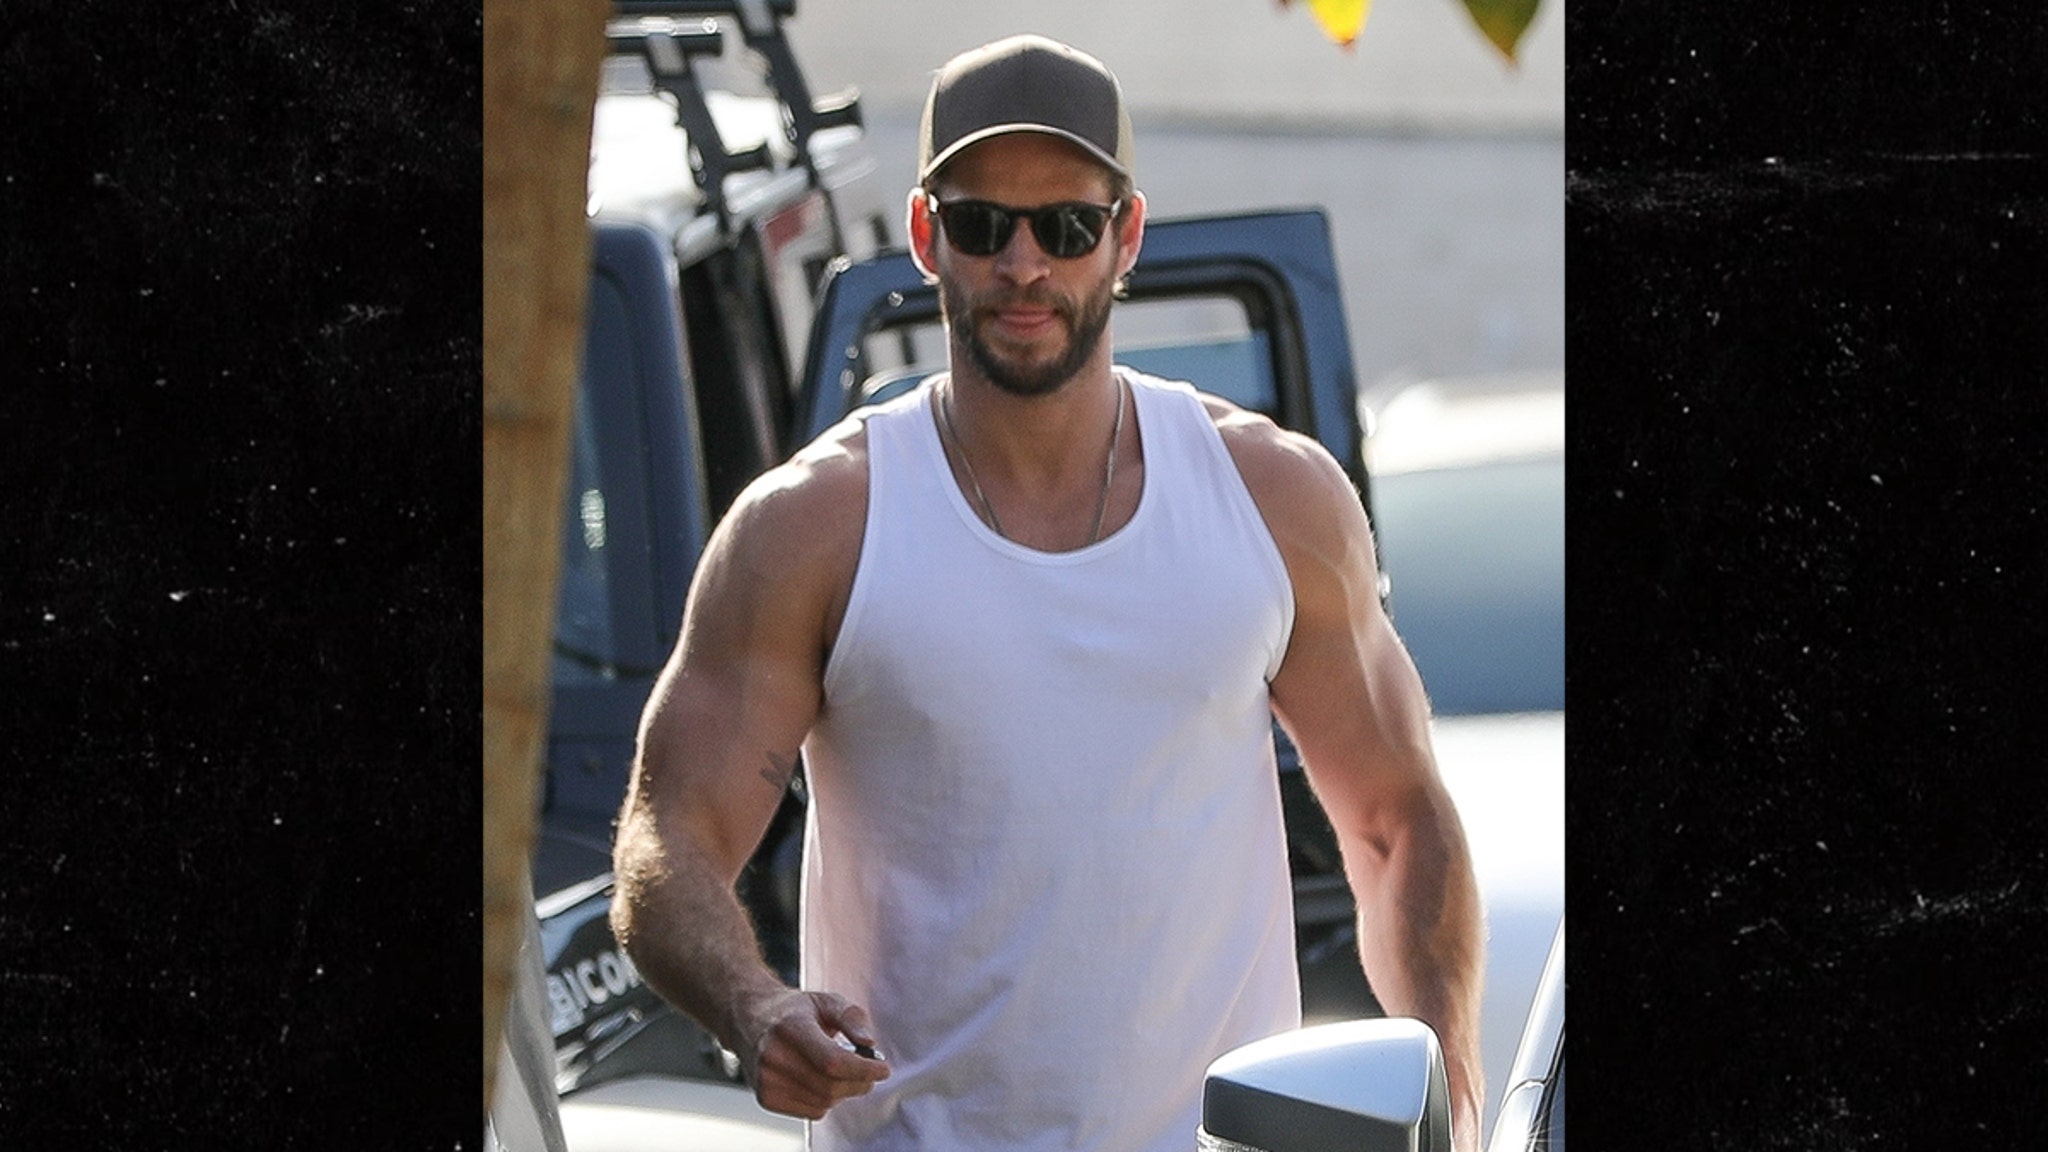 Liam Hemsworth Shows Off Massive Muscles After Gym Workout.